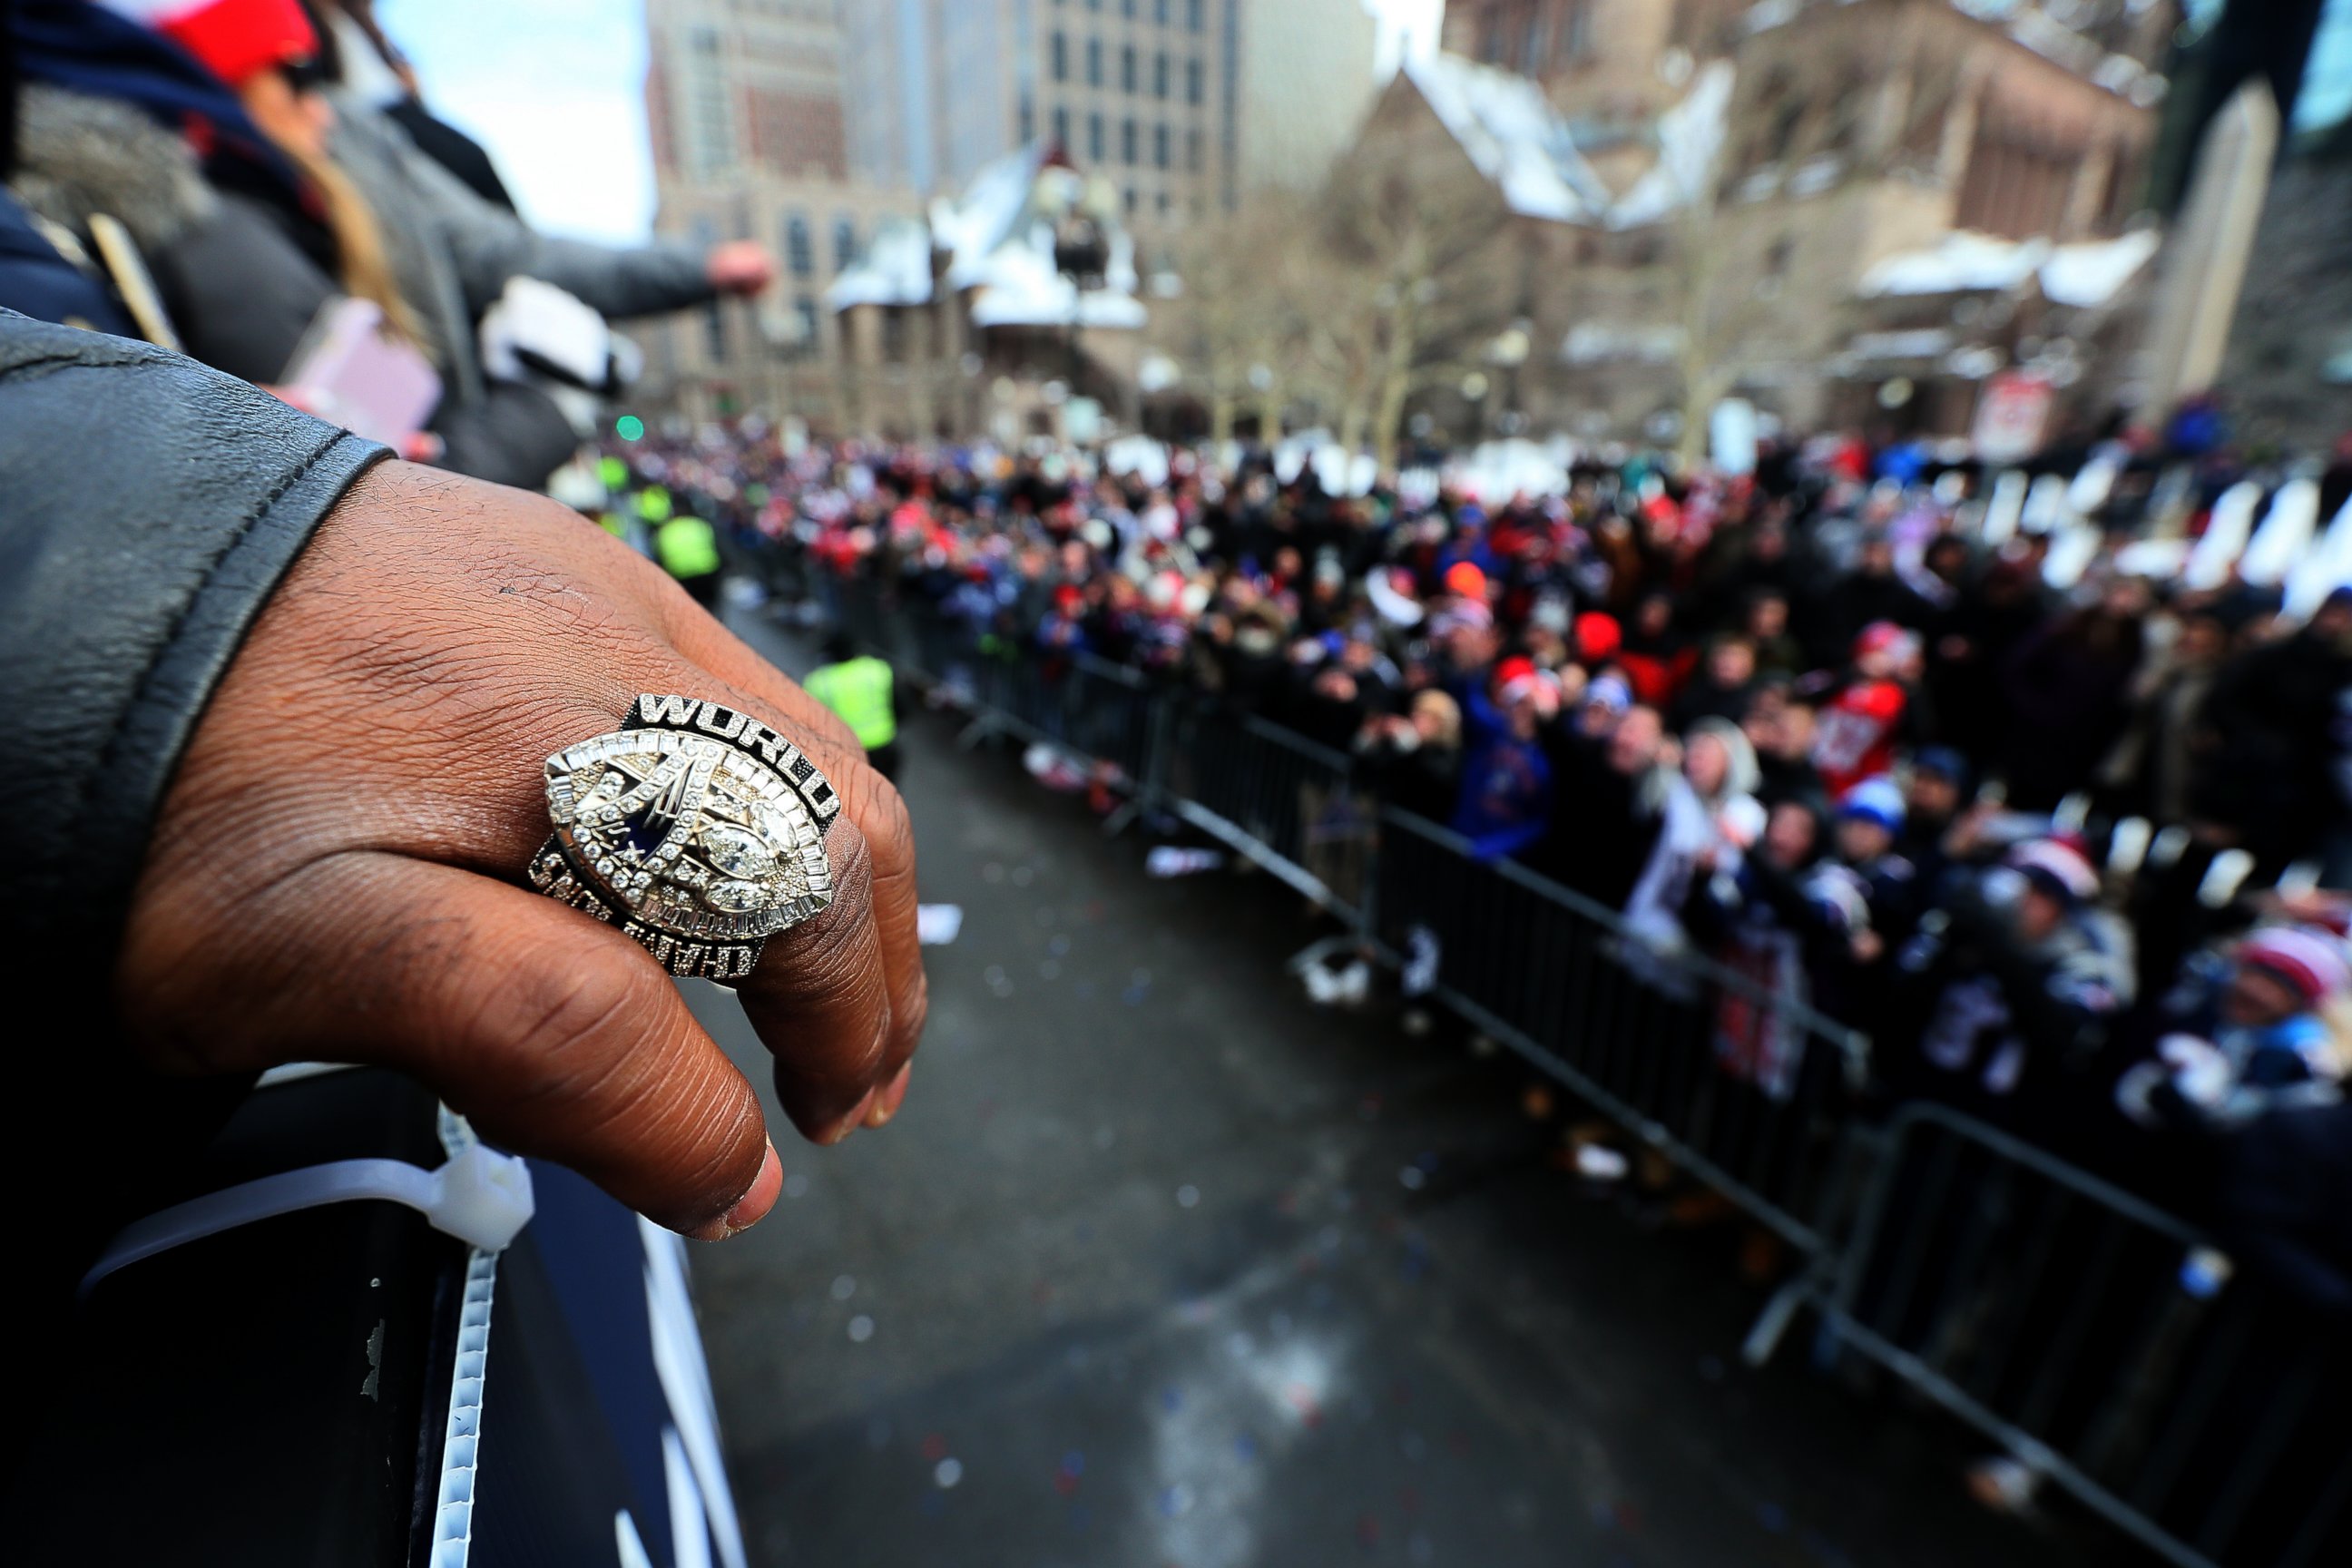 PHOTO: A view of Vince Wilfork's championship ring during the Patriots' Super Bowl victory parade on Boylston Street, Feb. 4, 2017.